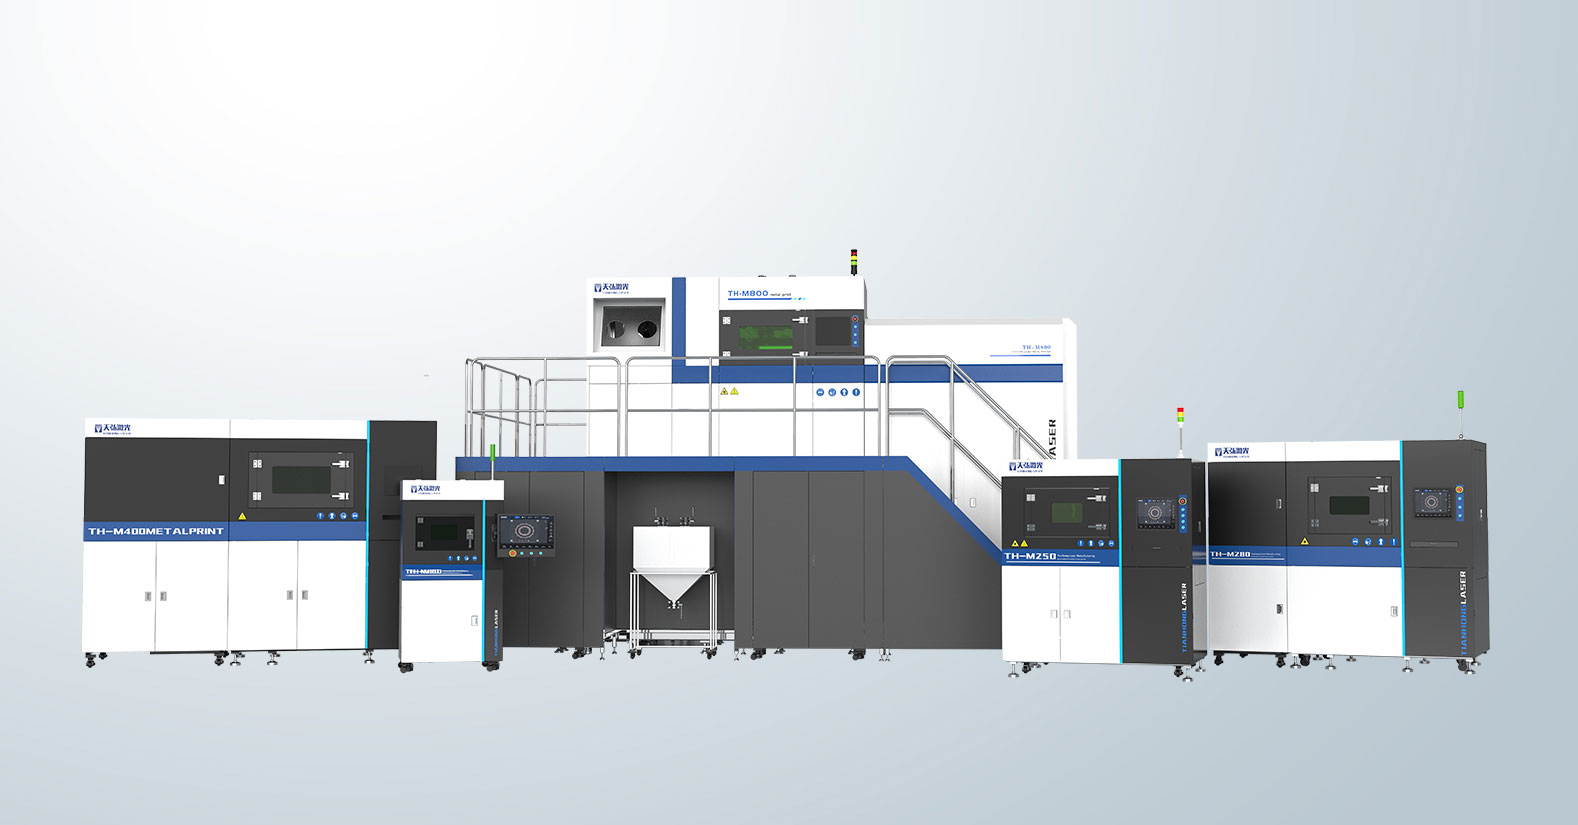 Tianhong Laser Launches Five Series of Laser Metal 3D Printer to Enhance New Quality of Productivity